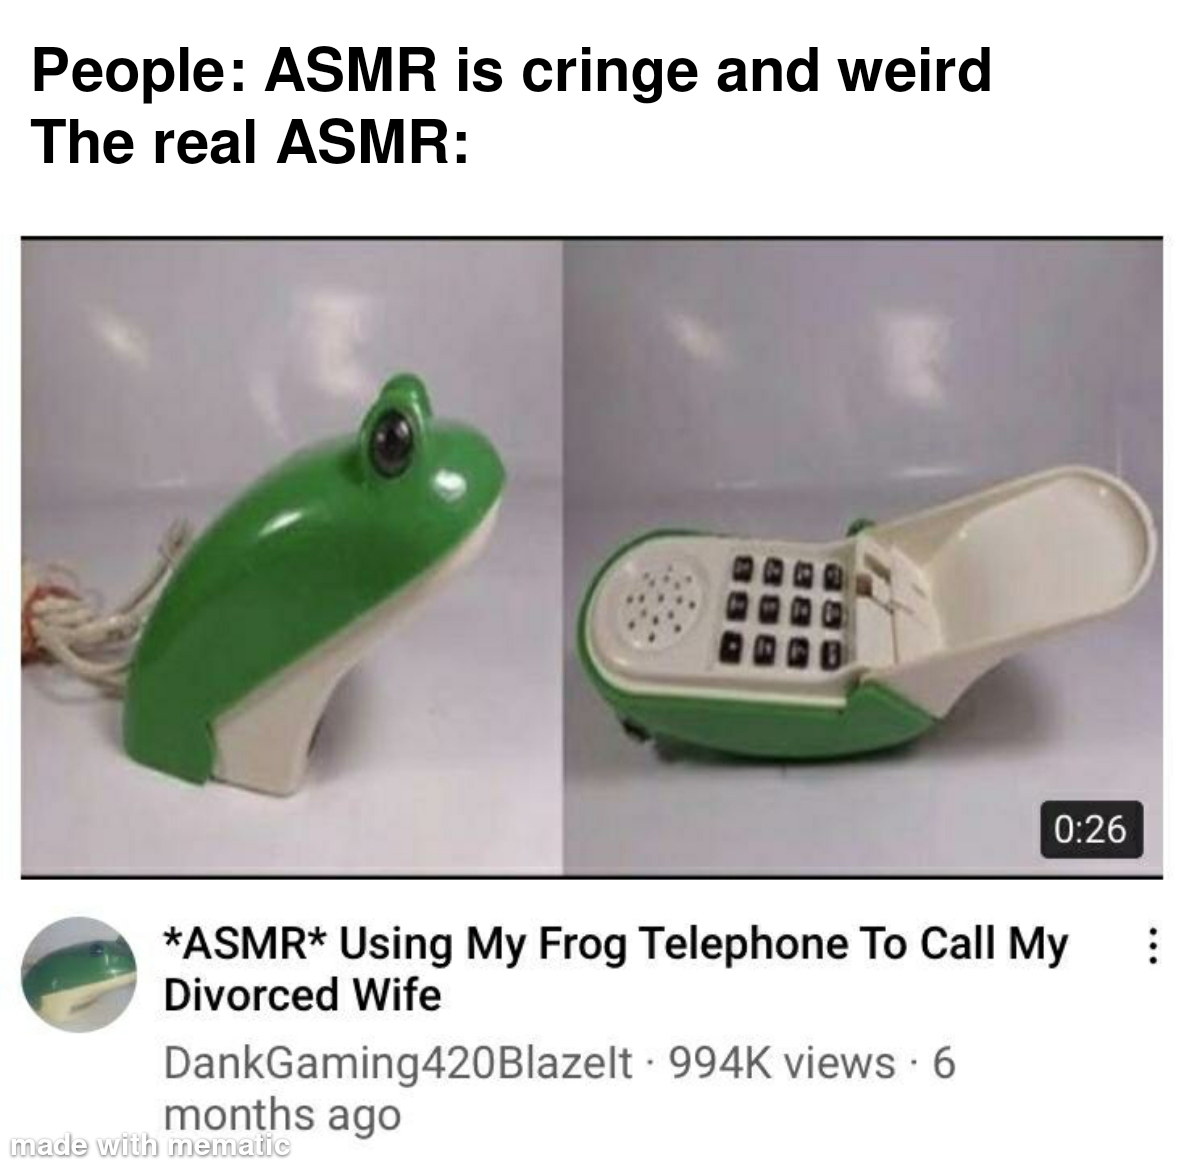 moshi moshi hai doppio desu - People Asmr is cringe and weird The real Asmr Asmr Using My Frog Telephone To Call My Divorced Wife DankGaming420Blazelt views 6 months ago made with mematic